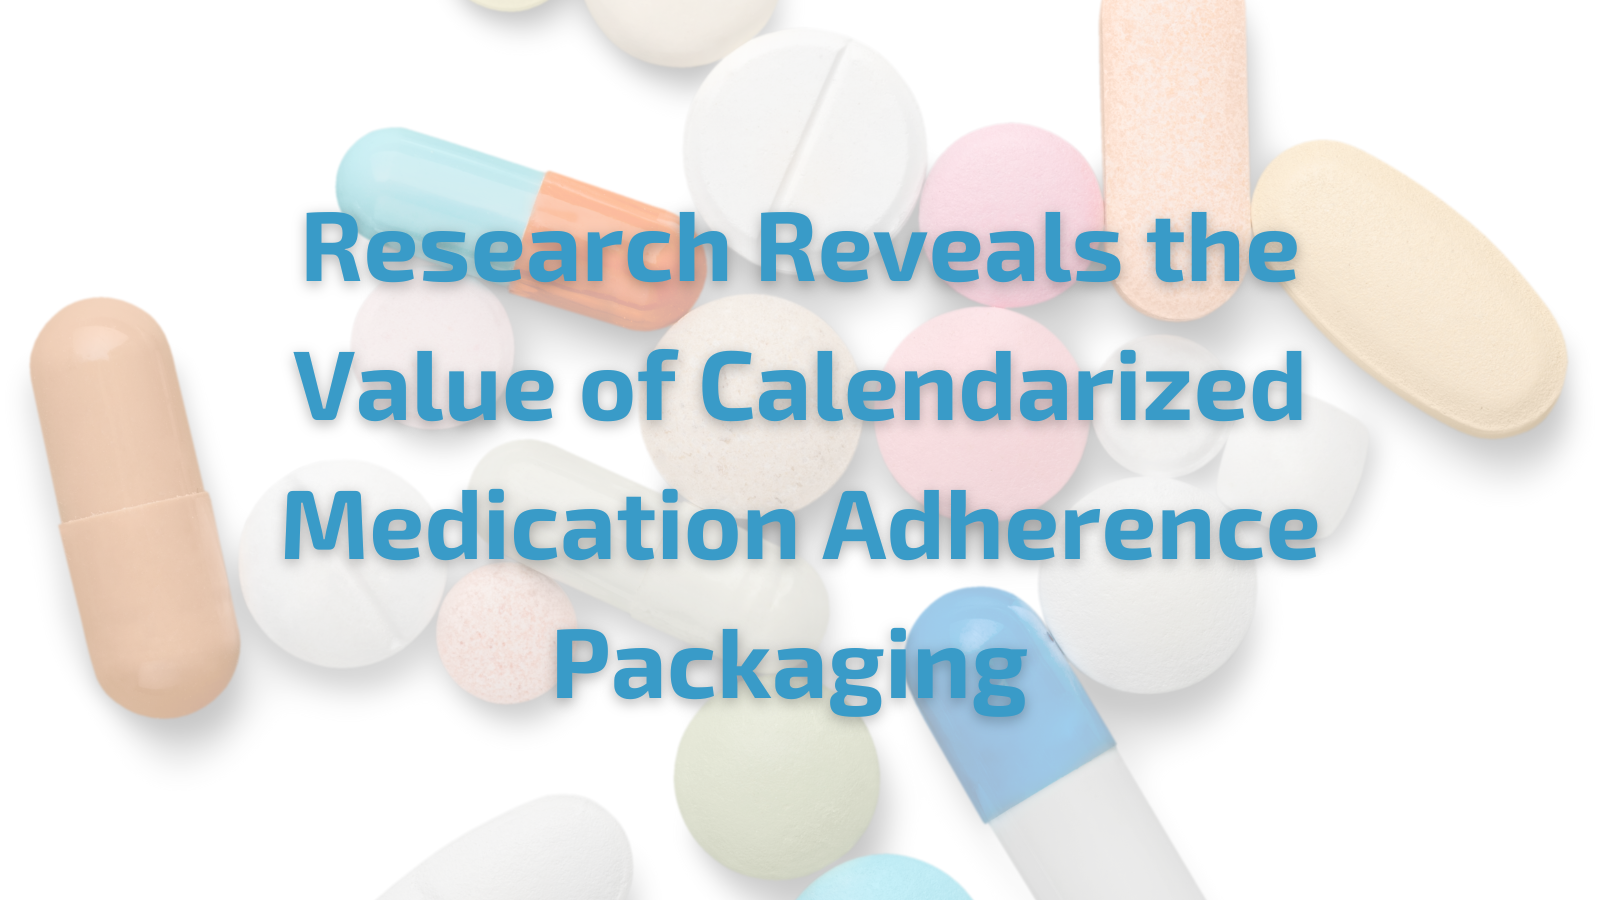 Research Reveals the Value of Calendarized Medication Adherence Packaging